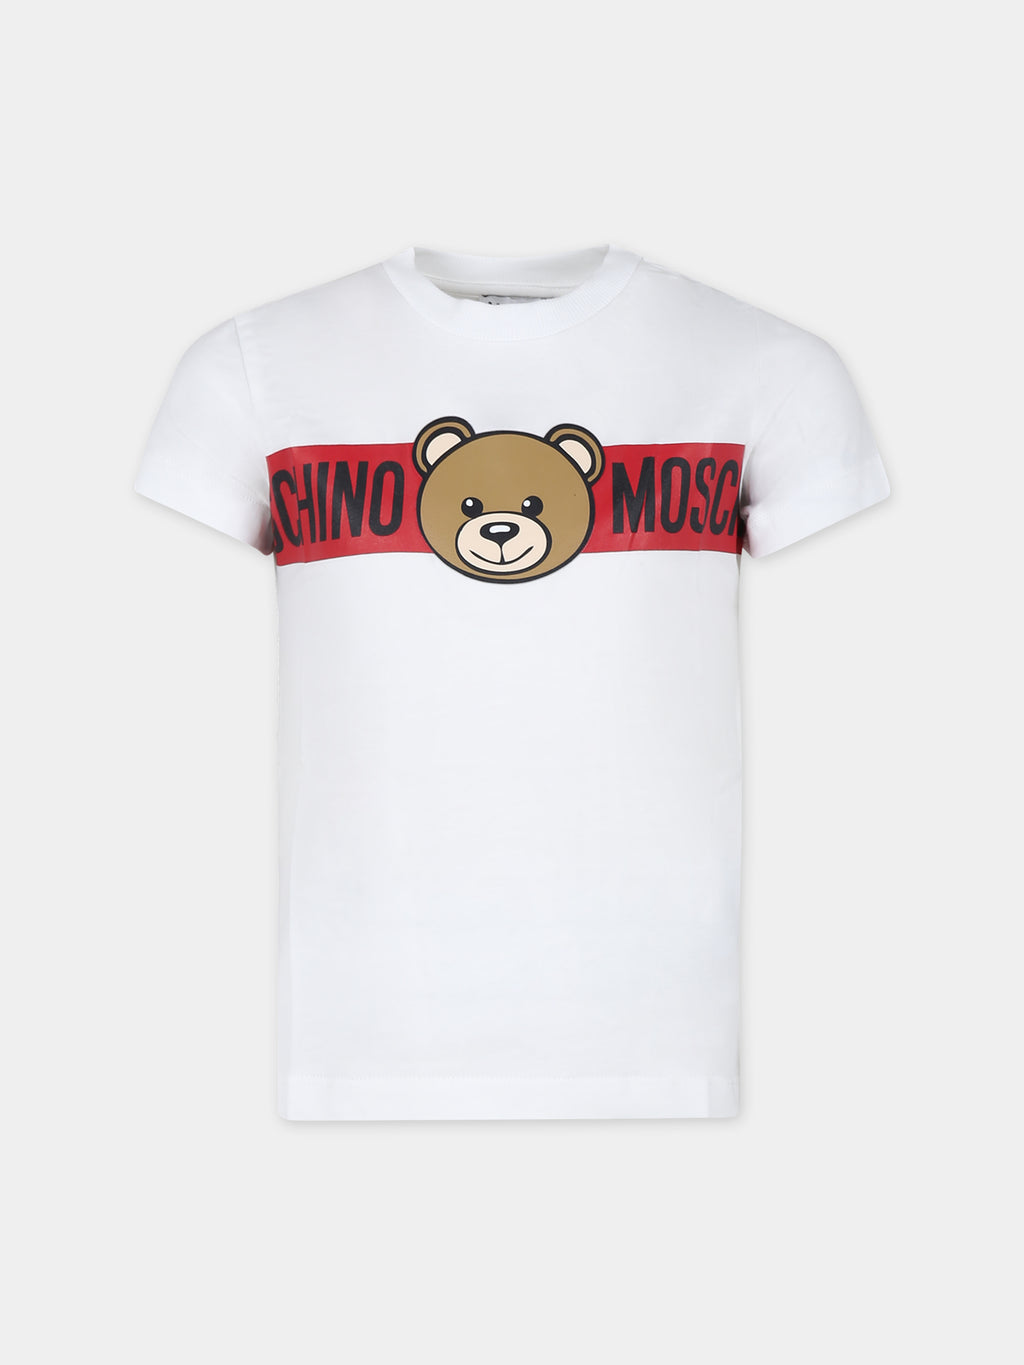 White t-shirt for kids with Teddy Bear and logo